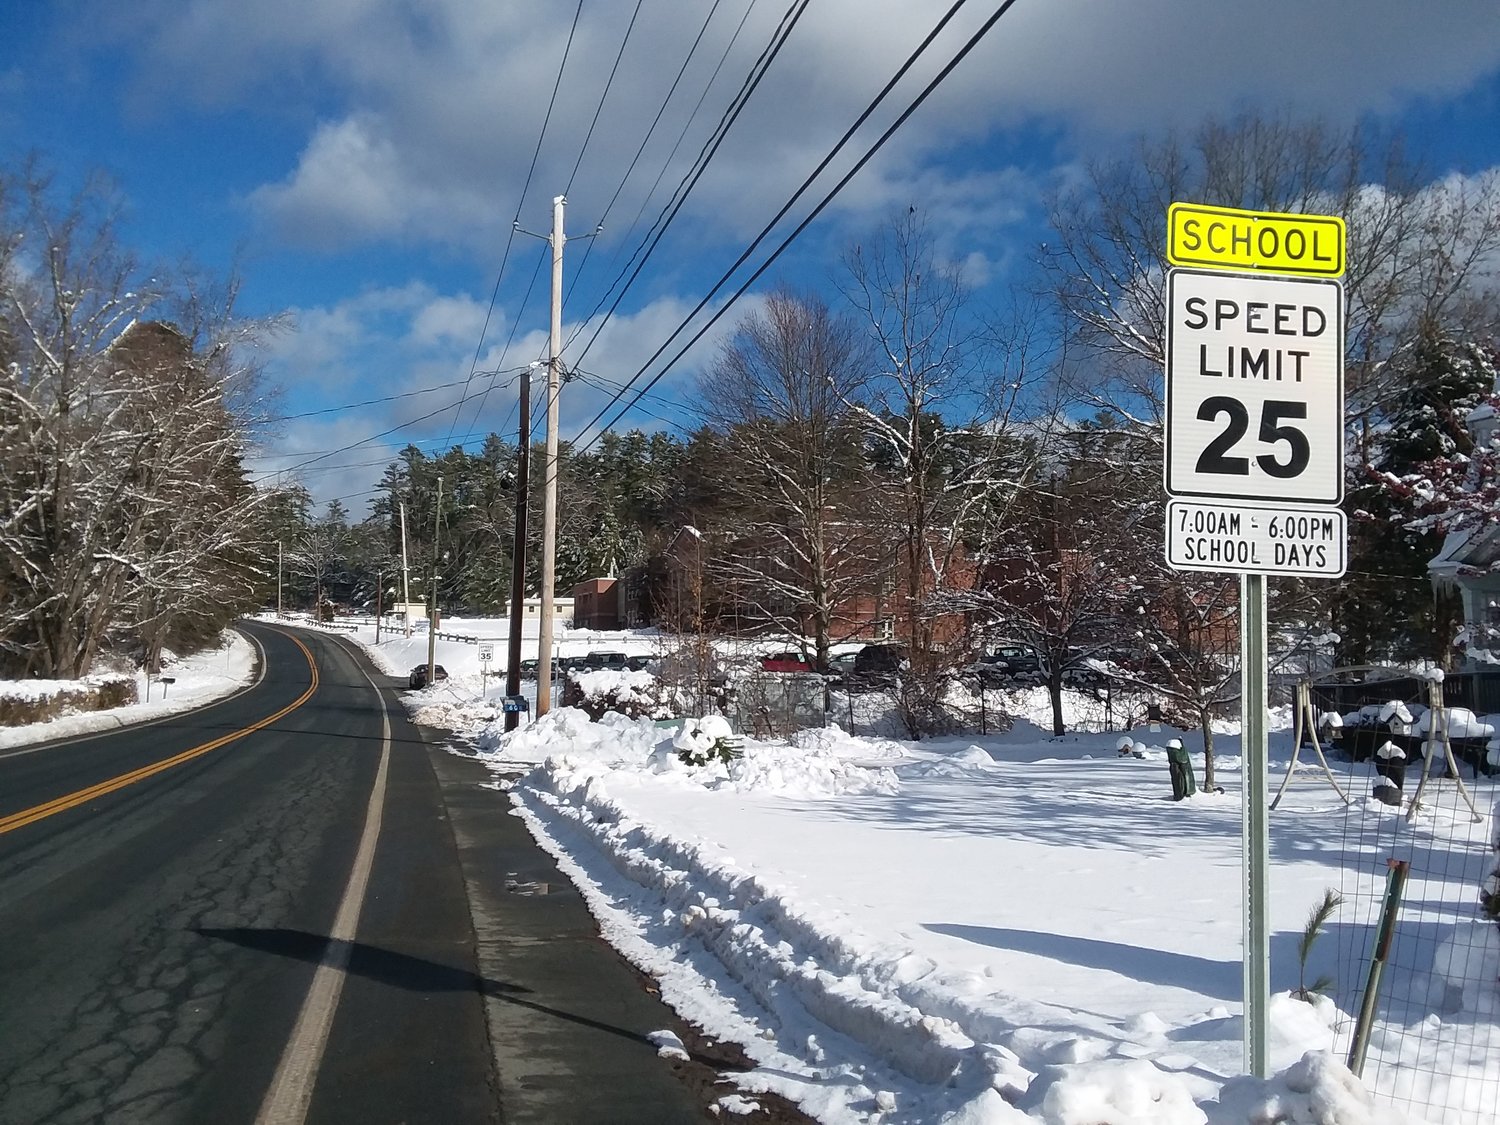 Drivers should take heed that the speed limit has been reduced by the Eldred High School to 25 MPH during school days.